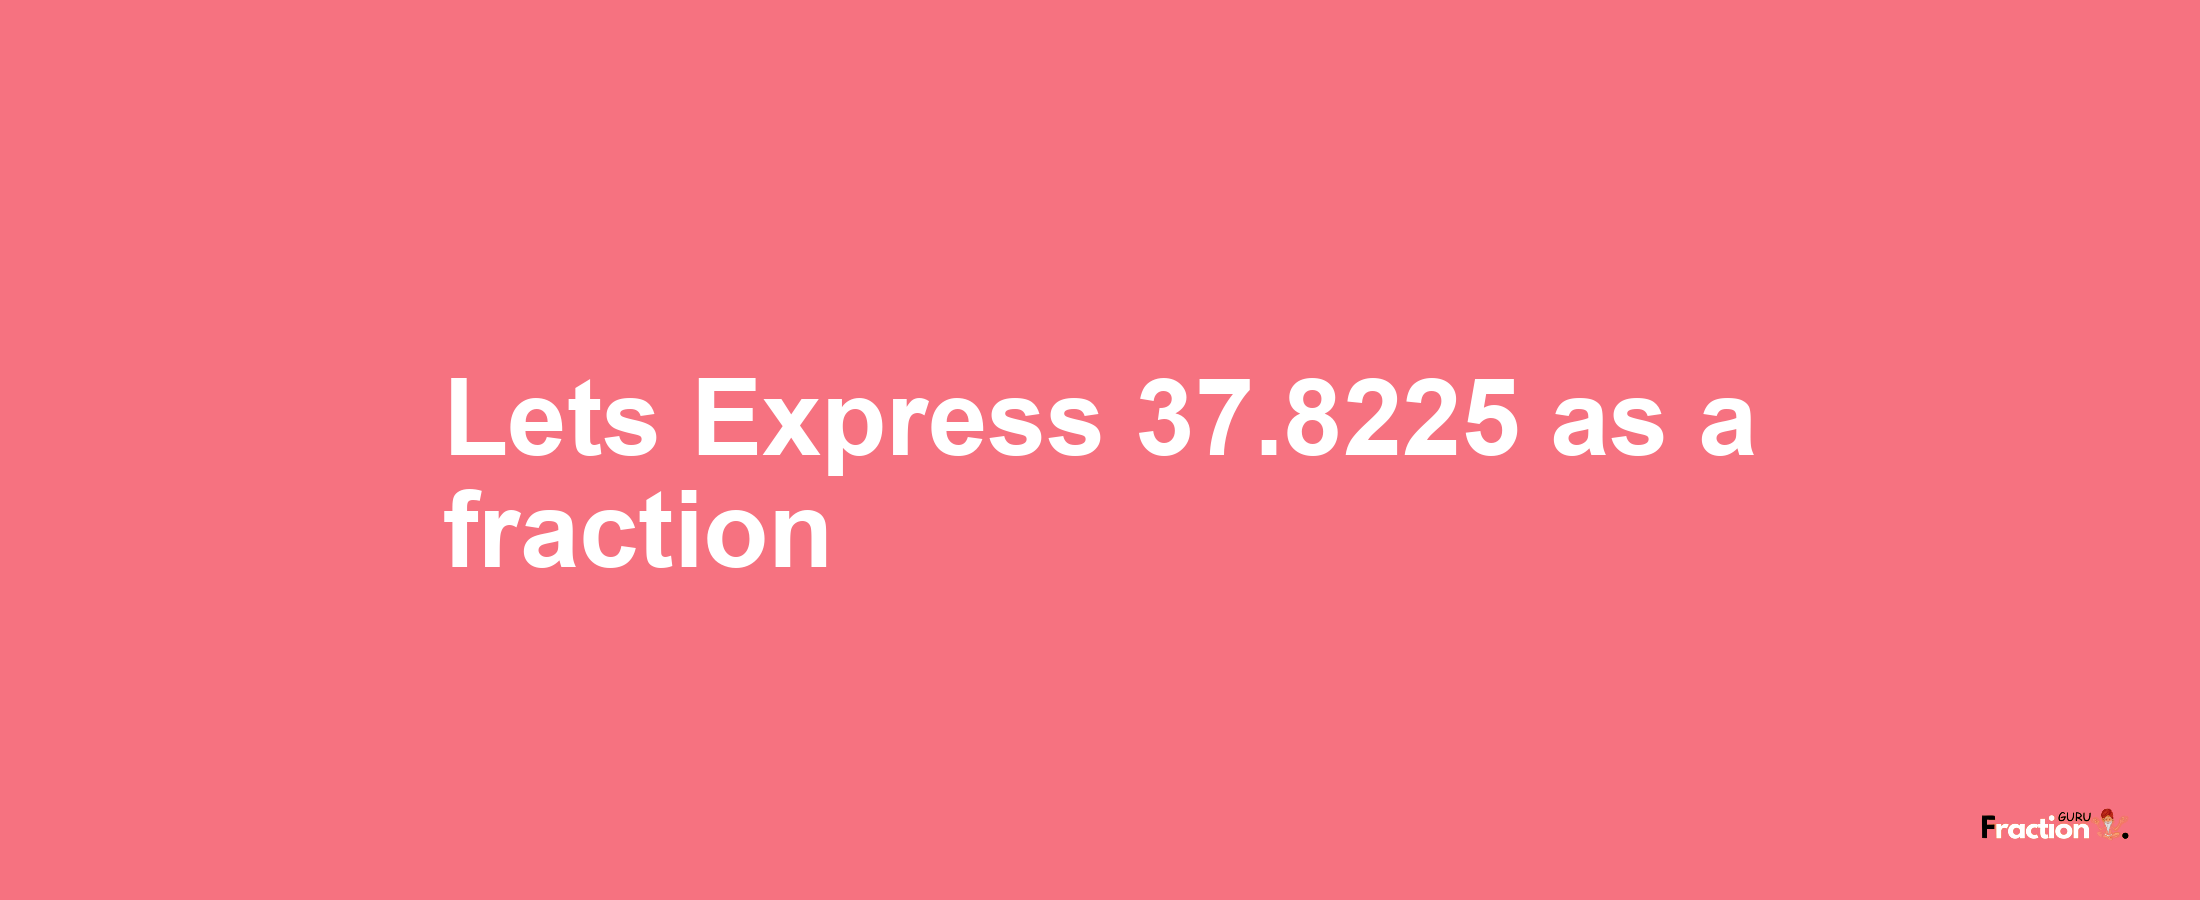 Lets Express 37.8225 as afraction